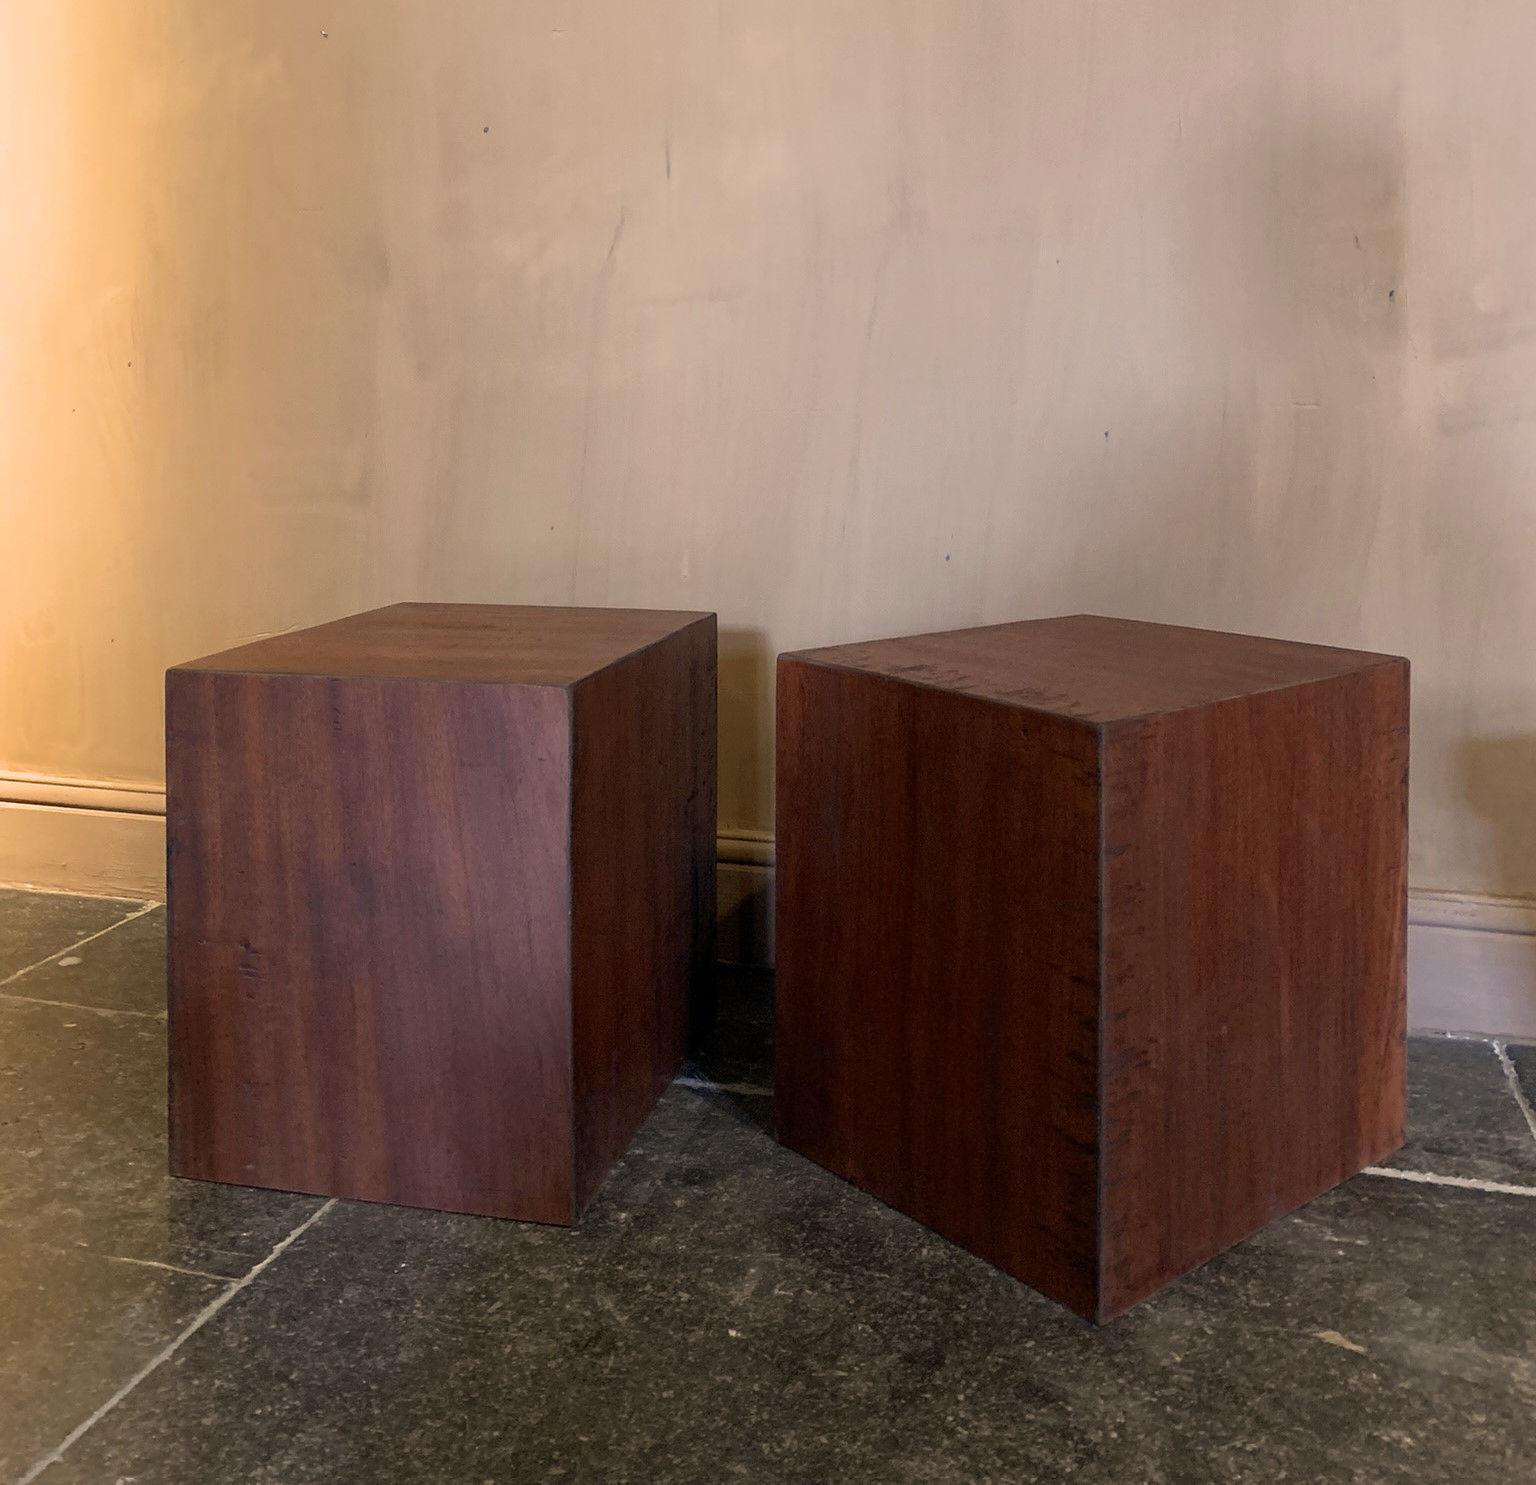 A pair of redwood cubes. We make this multifunctional sidetables from reclaimed one slab boards. The wood is probably a variant of so called bloodwood imported in the 19th century in Europe. We salvaged it in a old Spanish factory were it was used